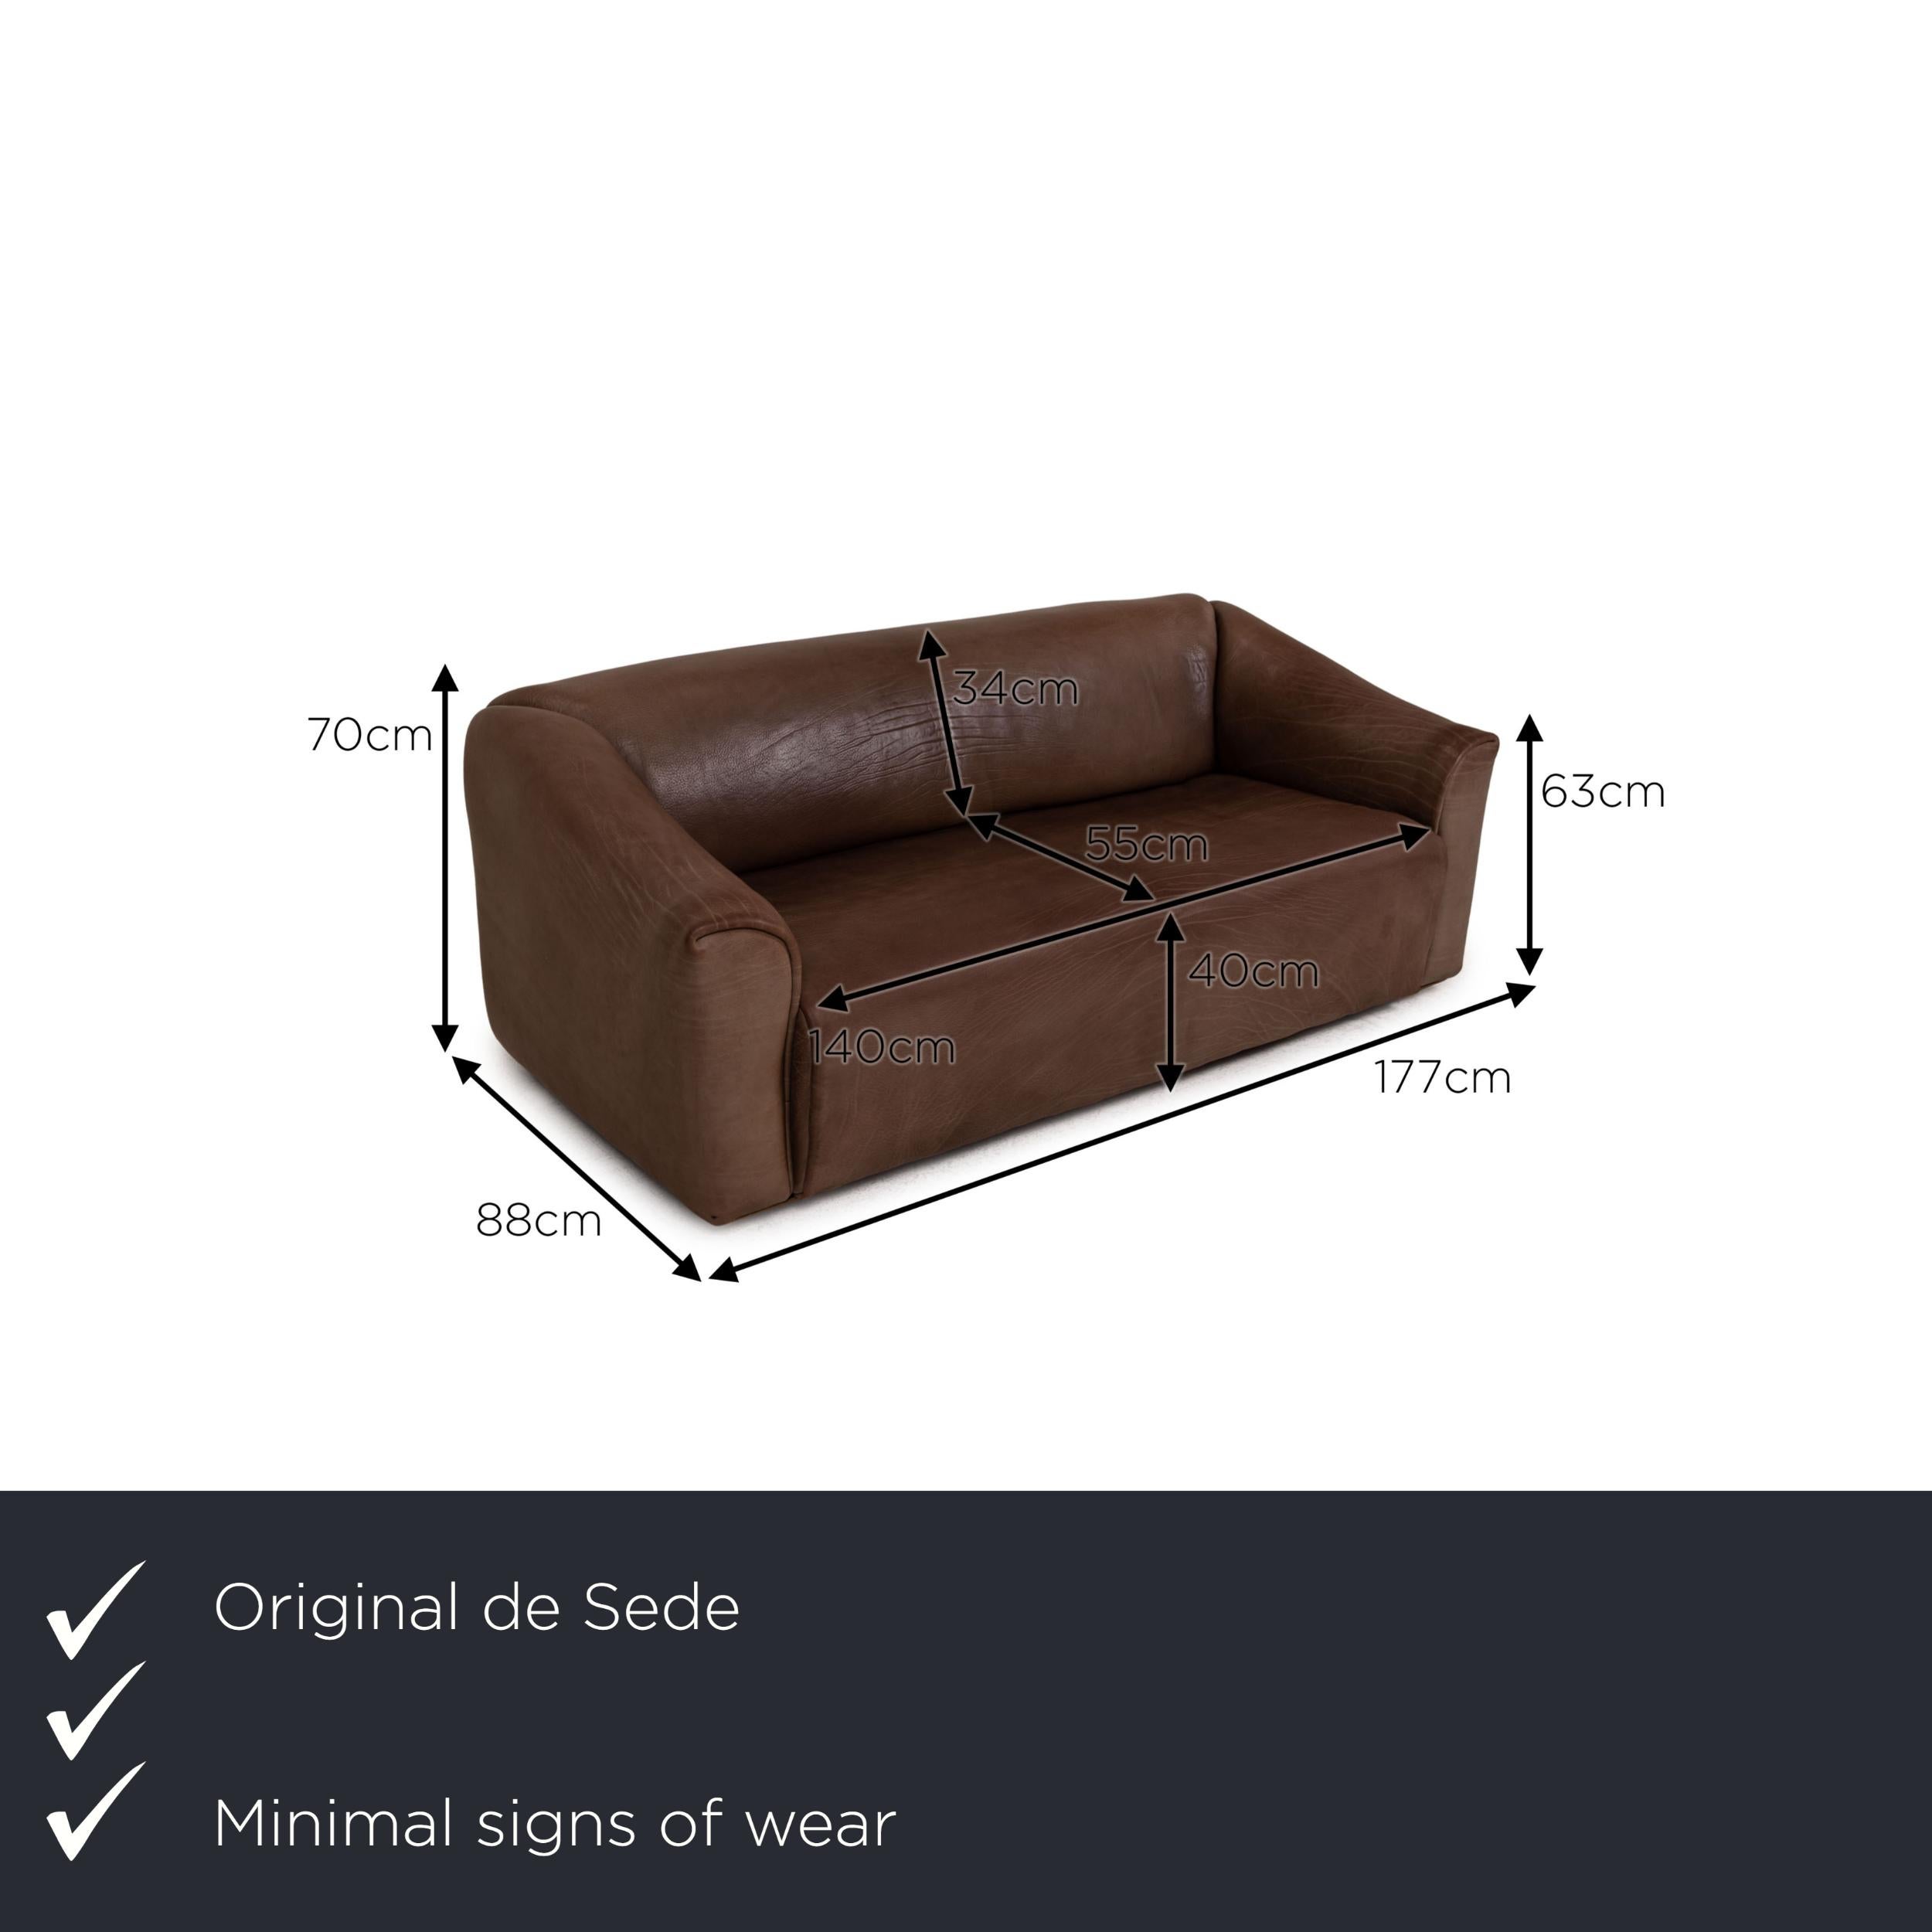 We present to you a De Sede ds 47 leather sofa brown three-seater couch.

Product measurements in centimeters:

depth: 88
width: 177
height: 70
seat height: 40
rest height: 63
seat depth: 55
seat width: 140
back height: 34.

 